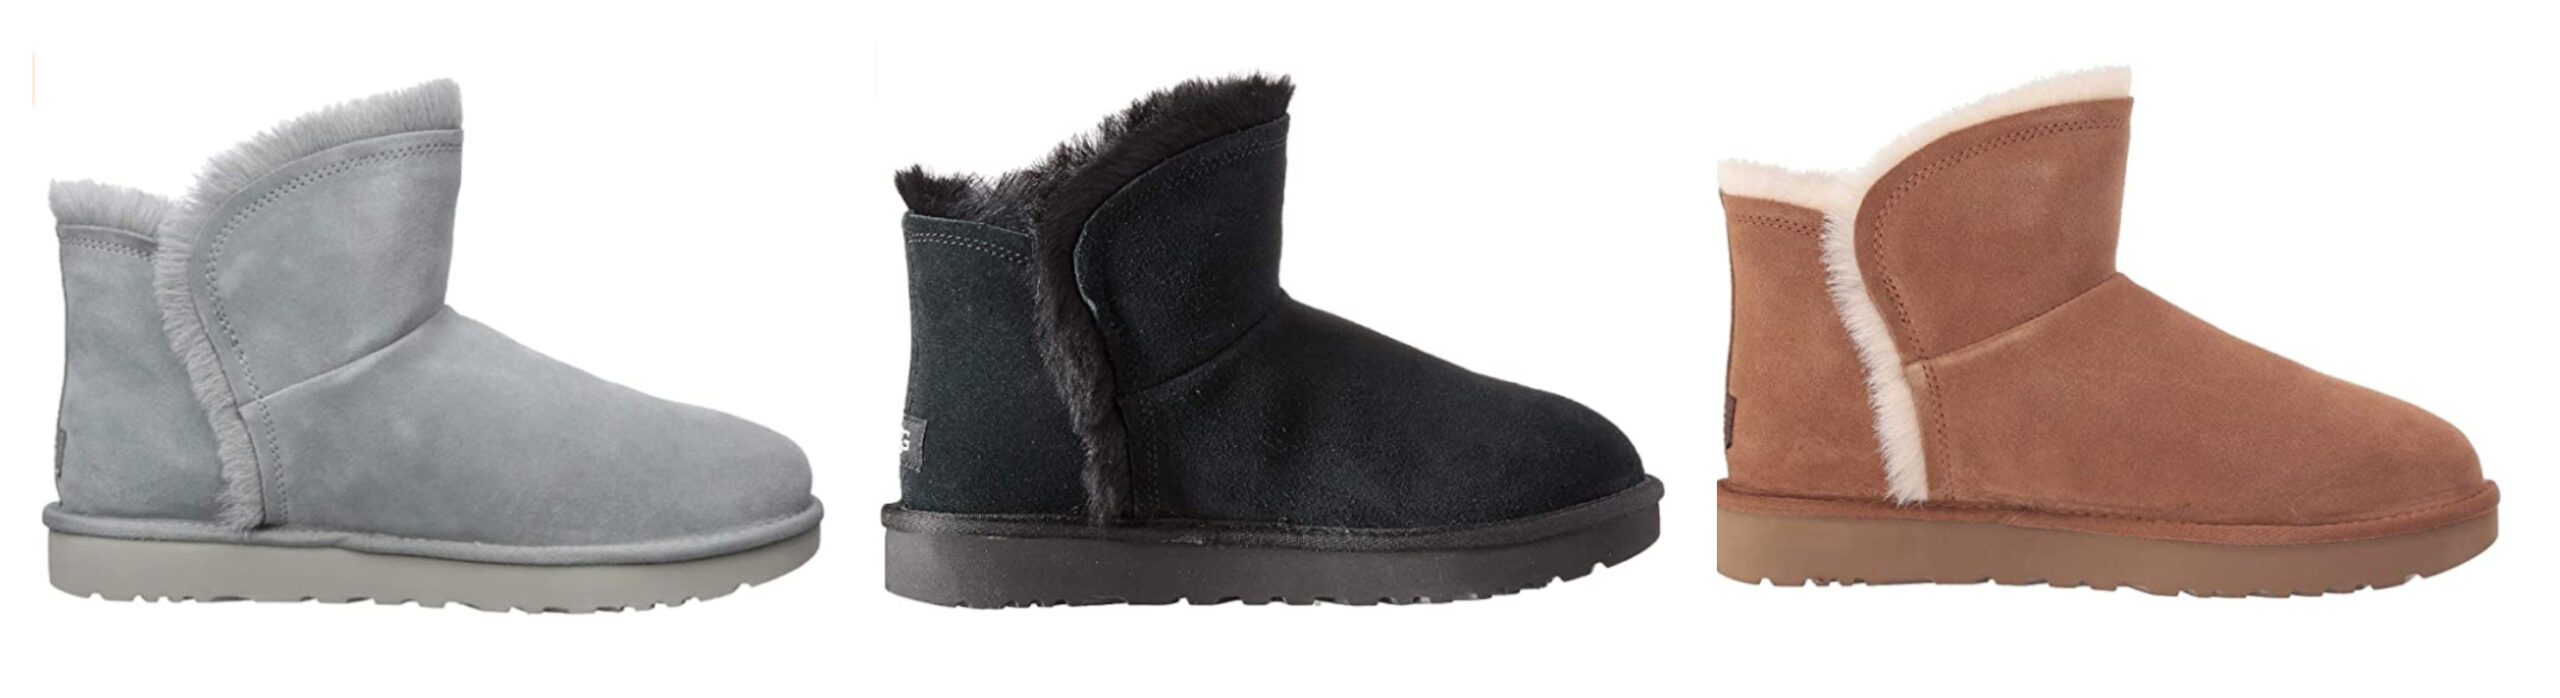 UGG Women’s Classic Mini Fluff High-Low Boots for ONLY $71.99 Shipped ...